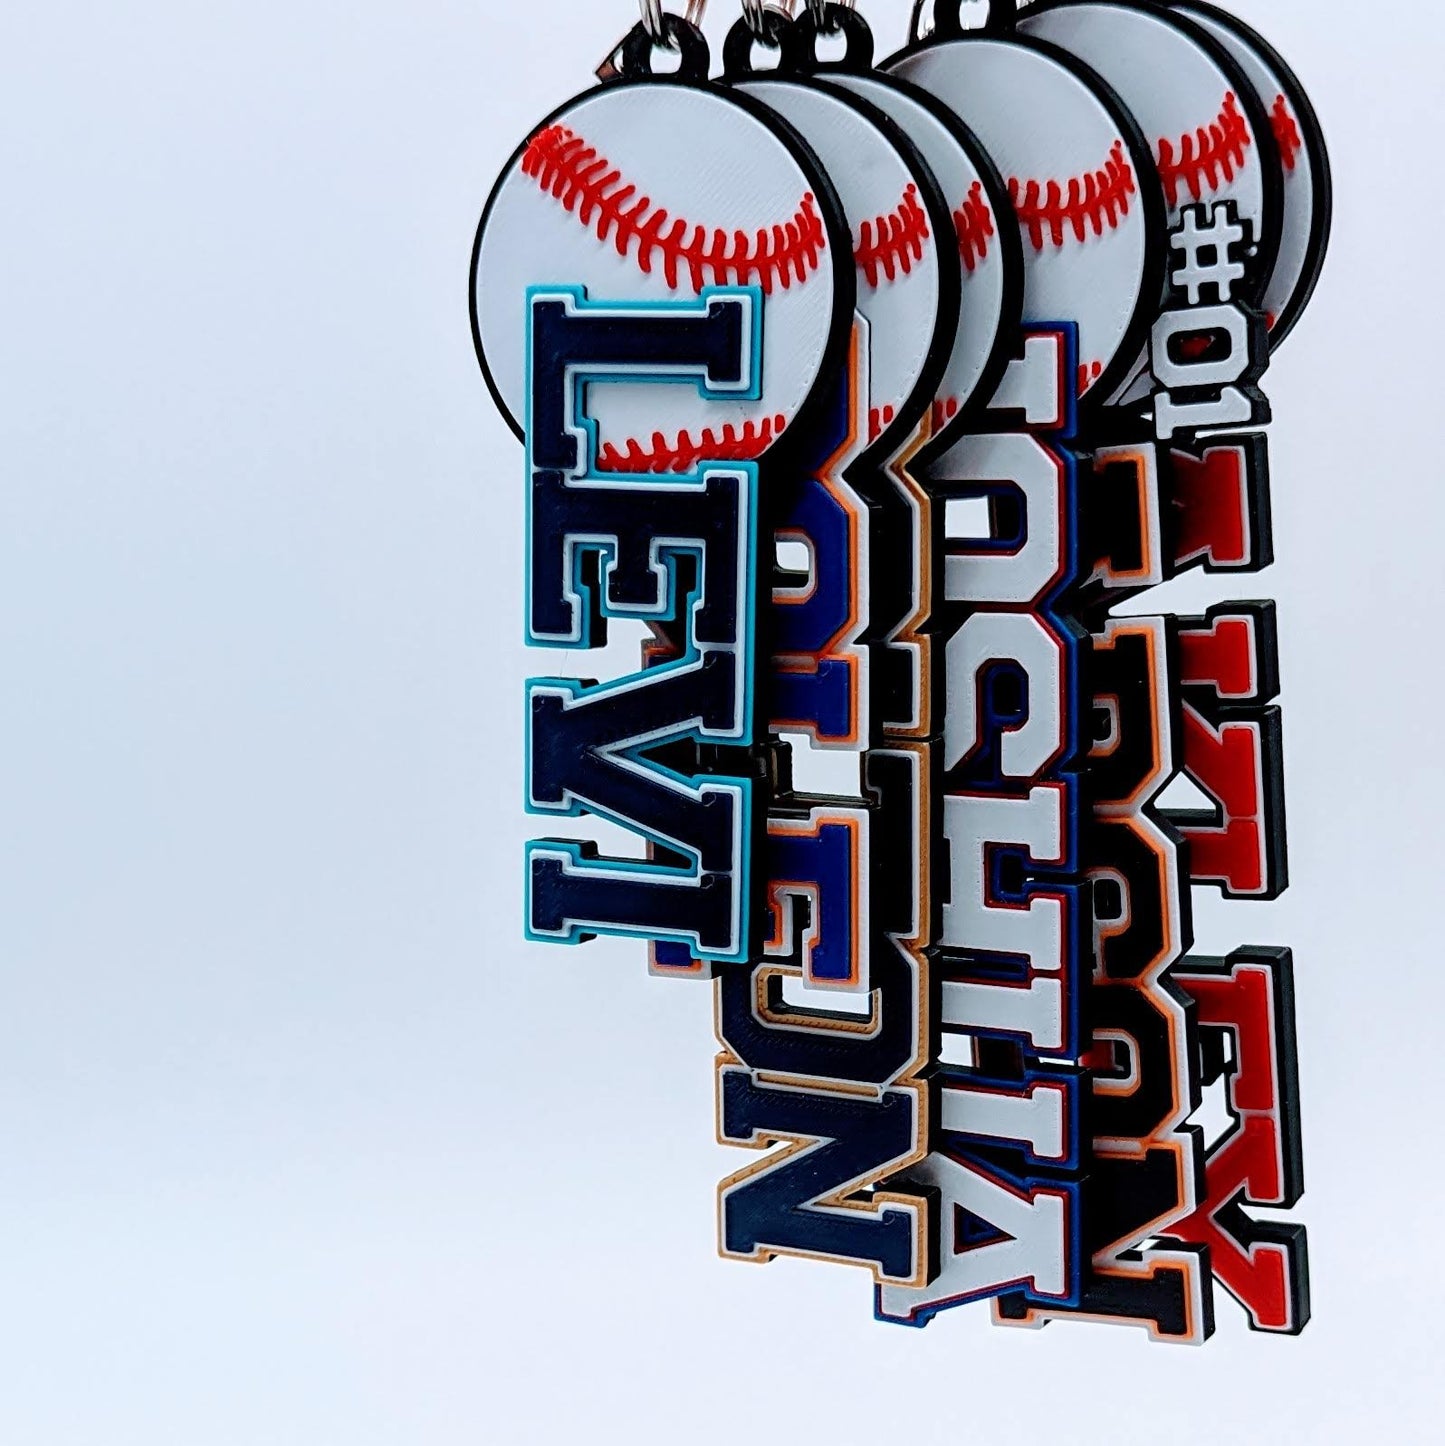 Customizable baseball bag tag featuring team logo and player name on a durable, vibrant background. Ideal for personalizing sports equipment